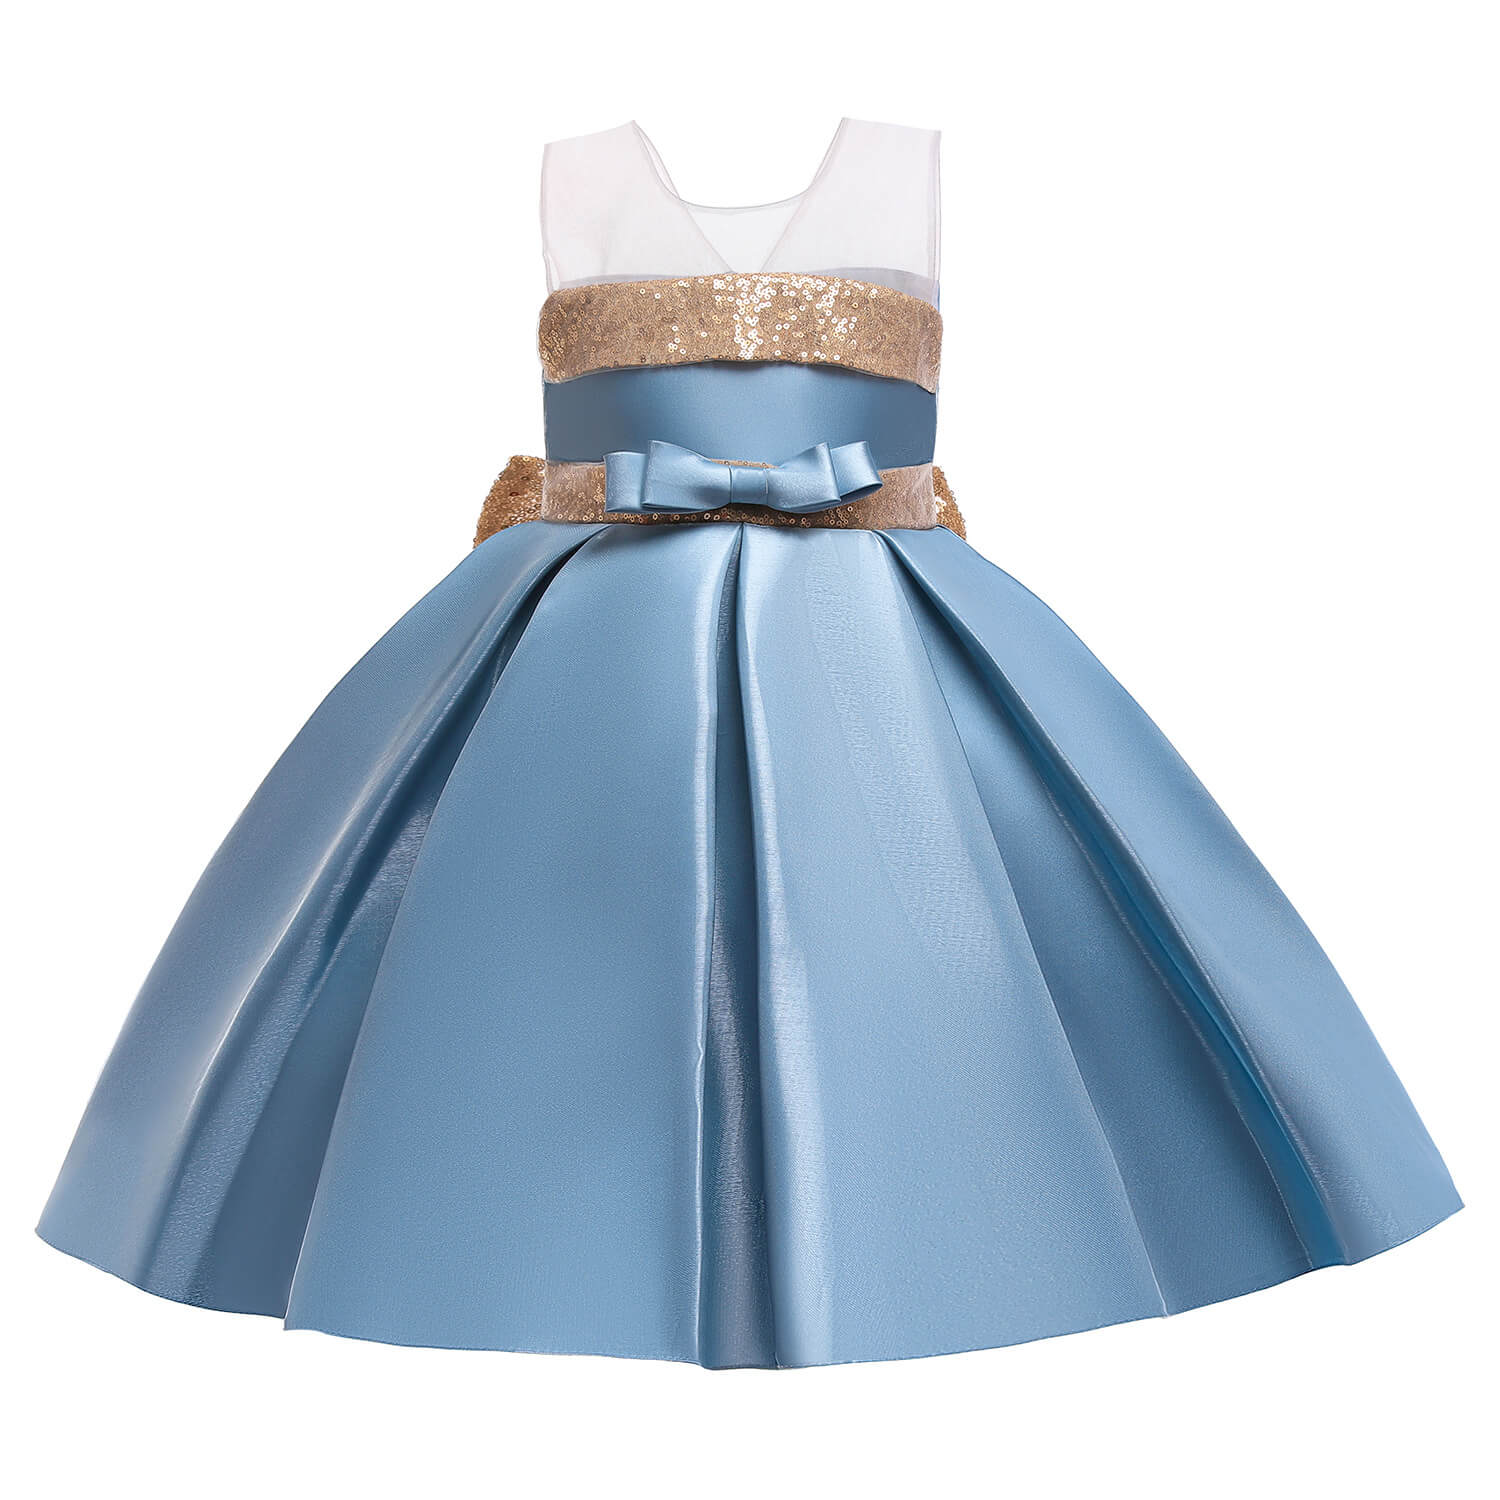 Sequined Big Bow Flower Girl Weeding Party Dress Princess Summer Ball Gown